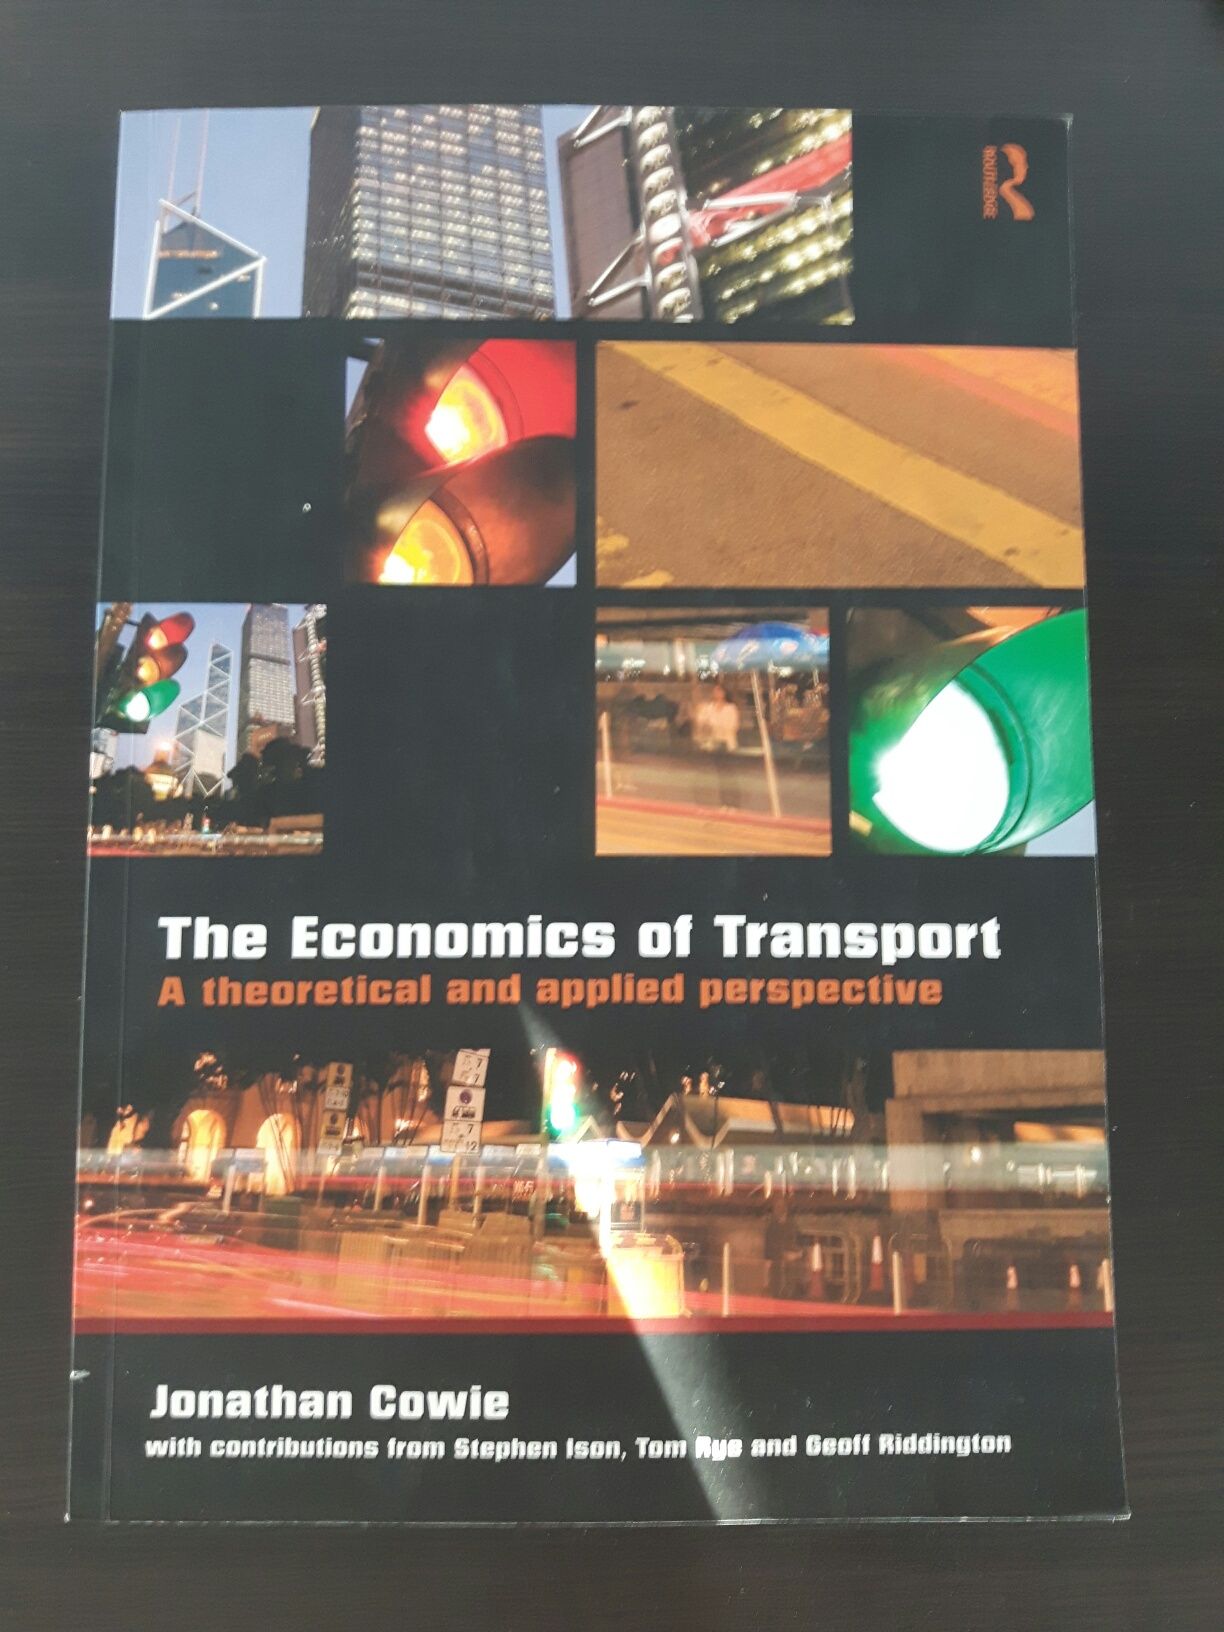 Jonathan Cowie
The Economics of Transport: A Theoretical and Applied P